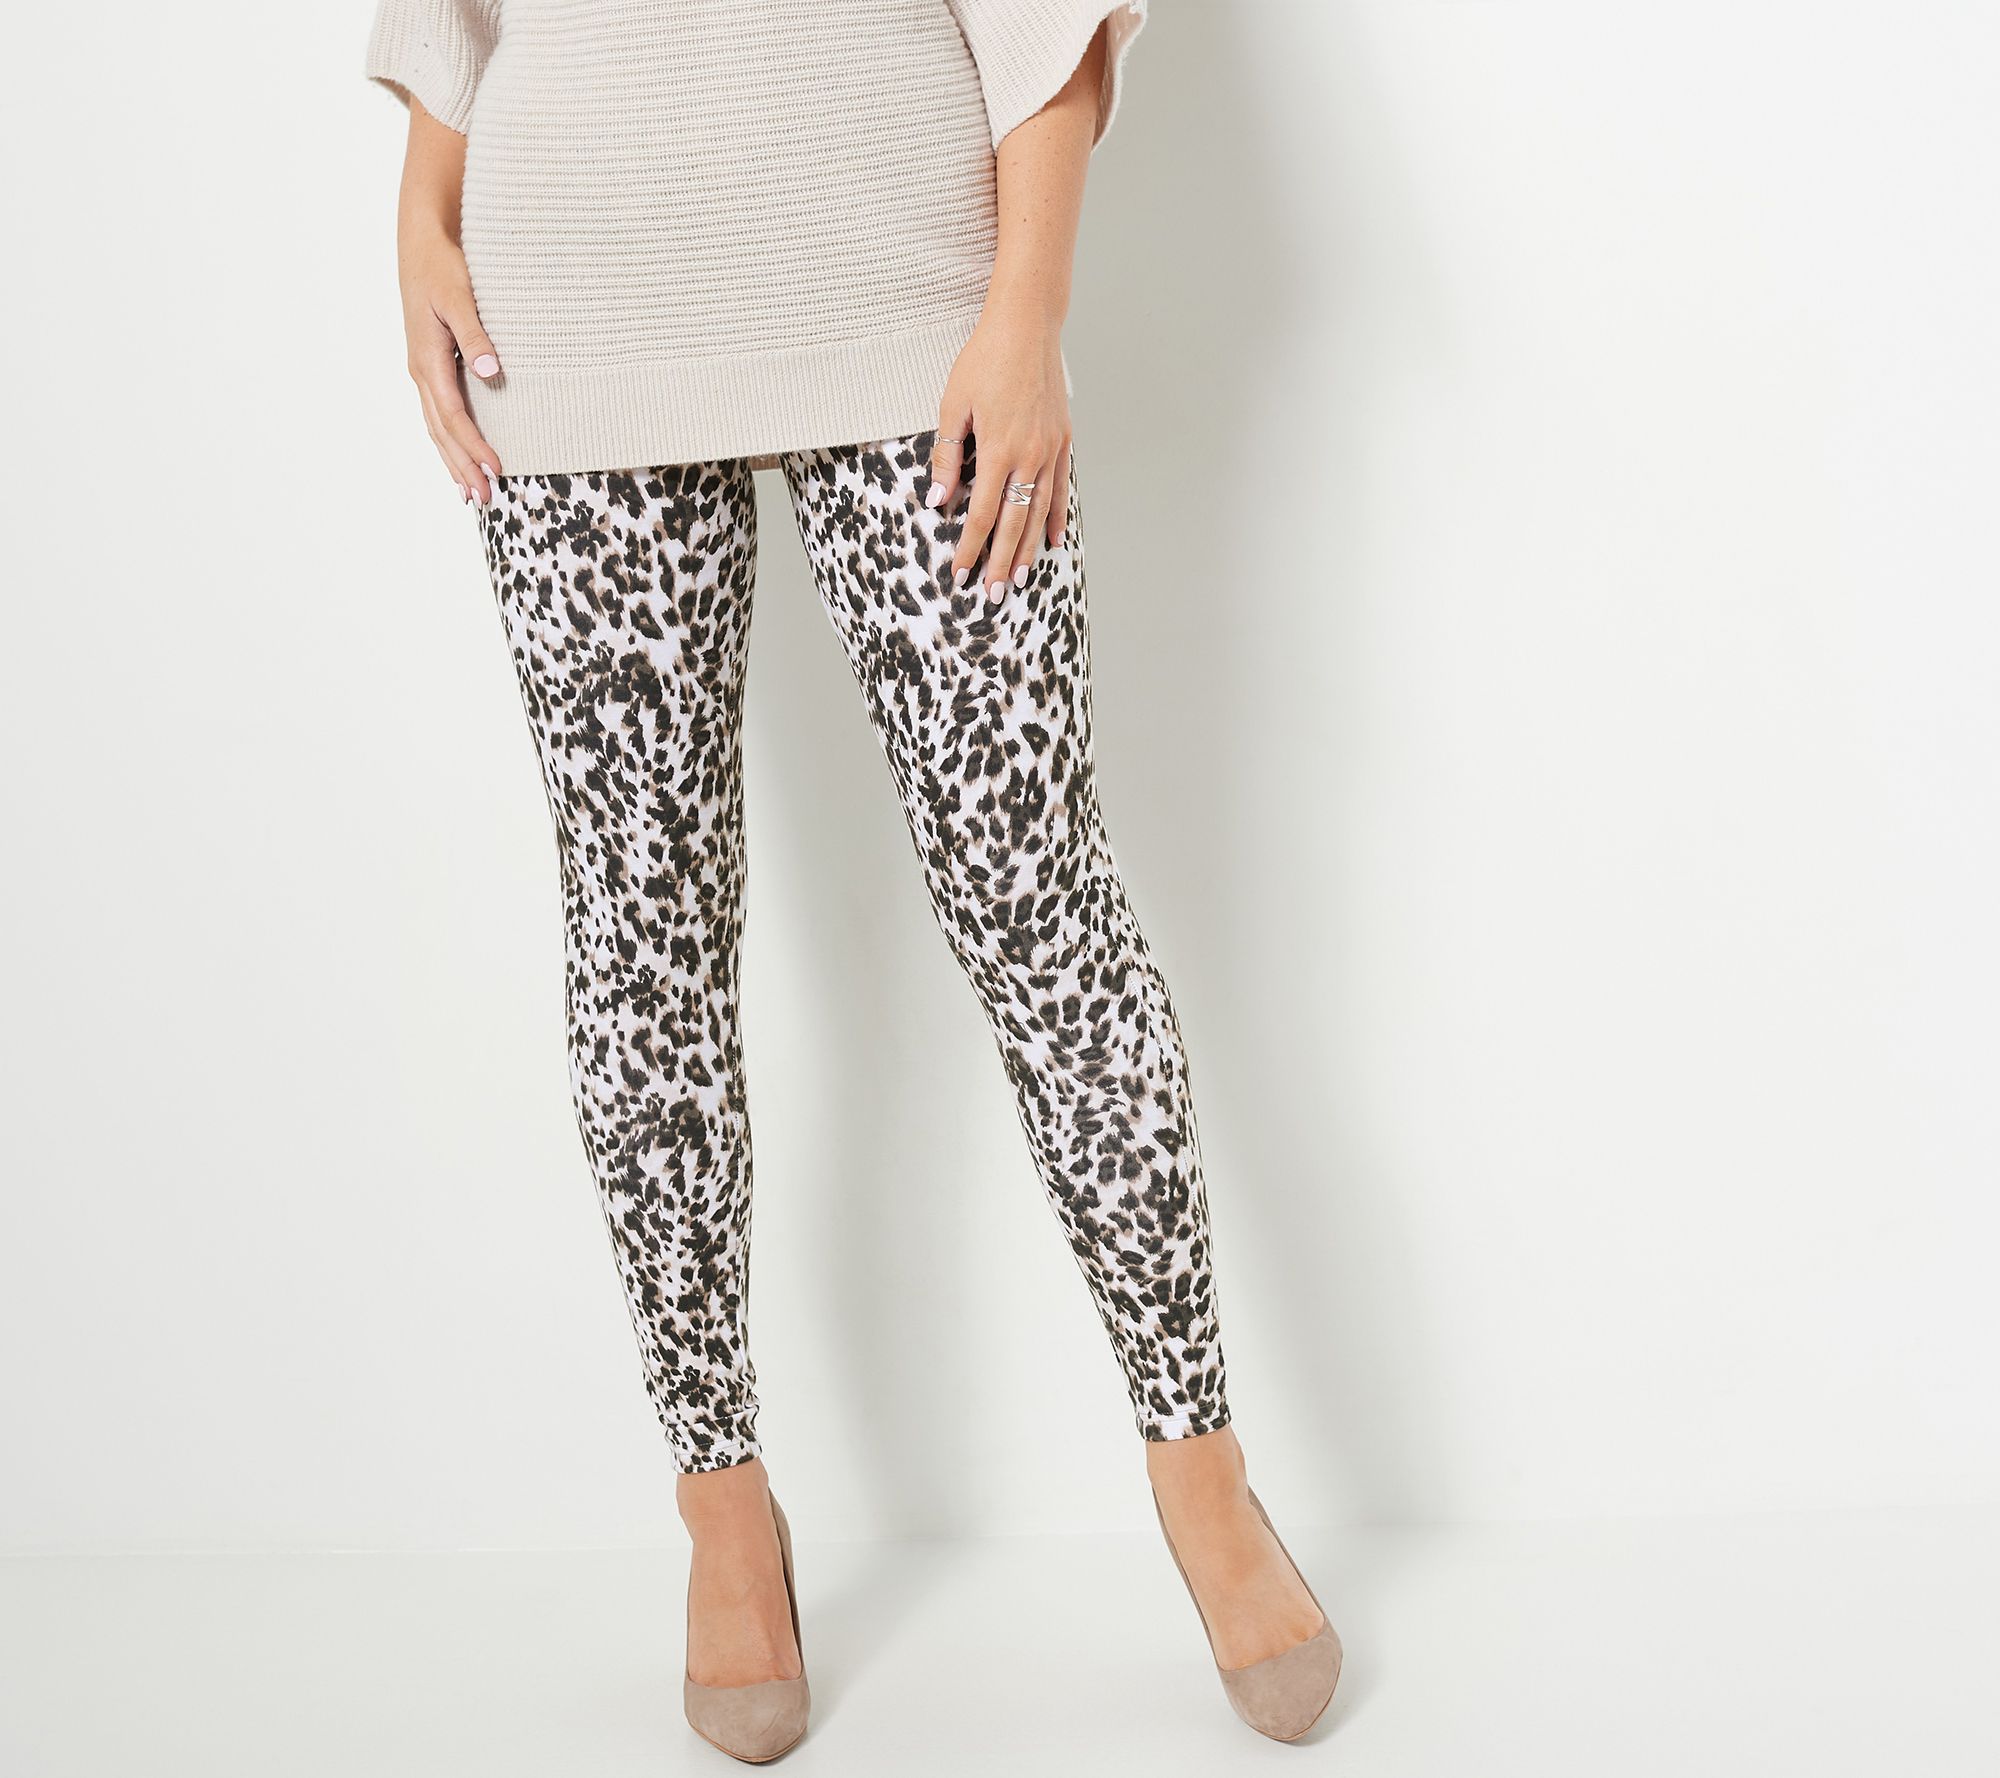 Women With Control Regular Cotton Jersey Pull On Slim Pants 